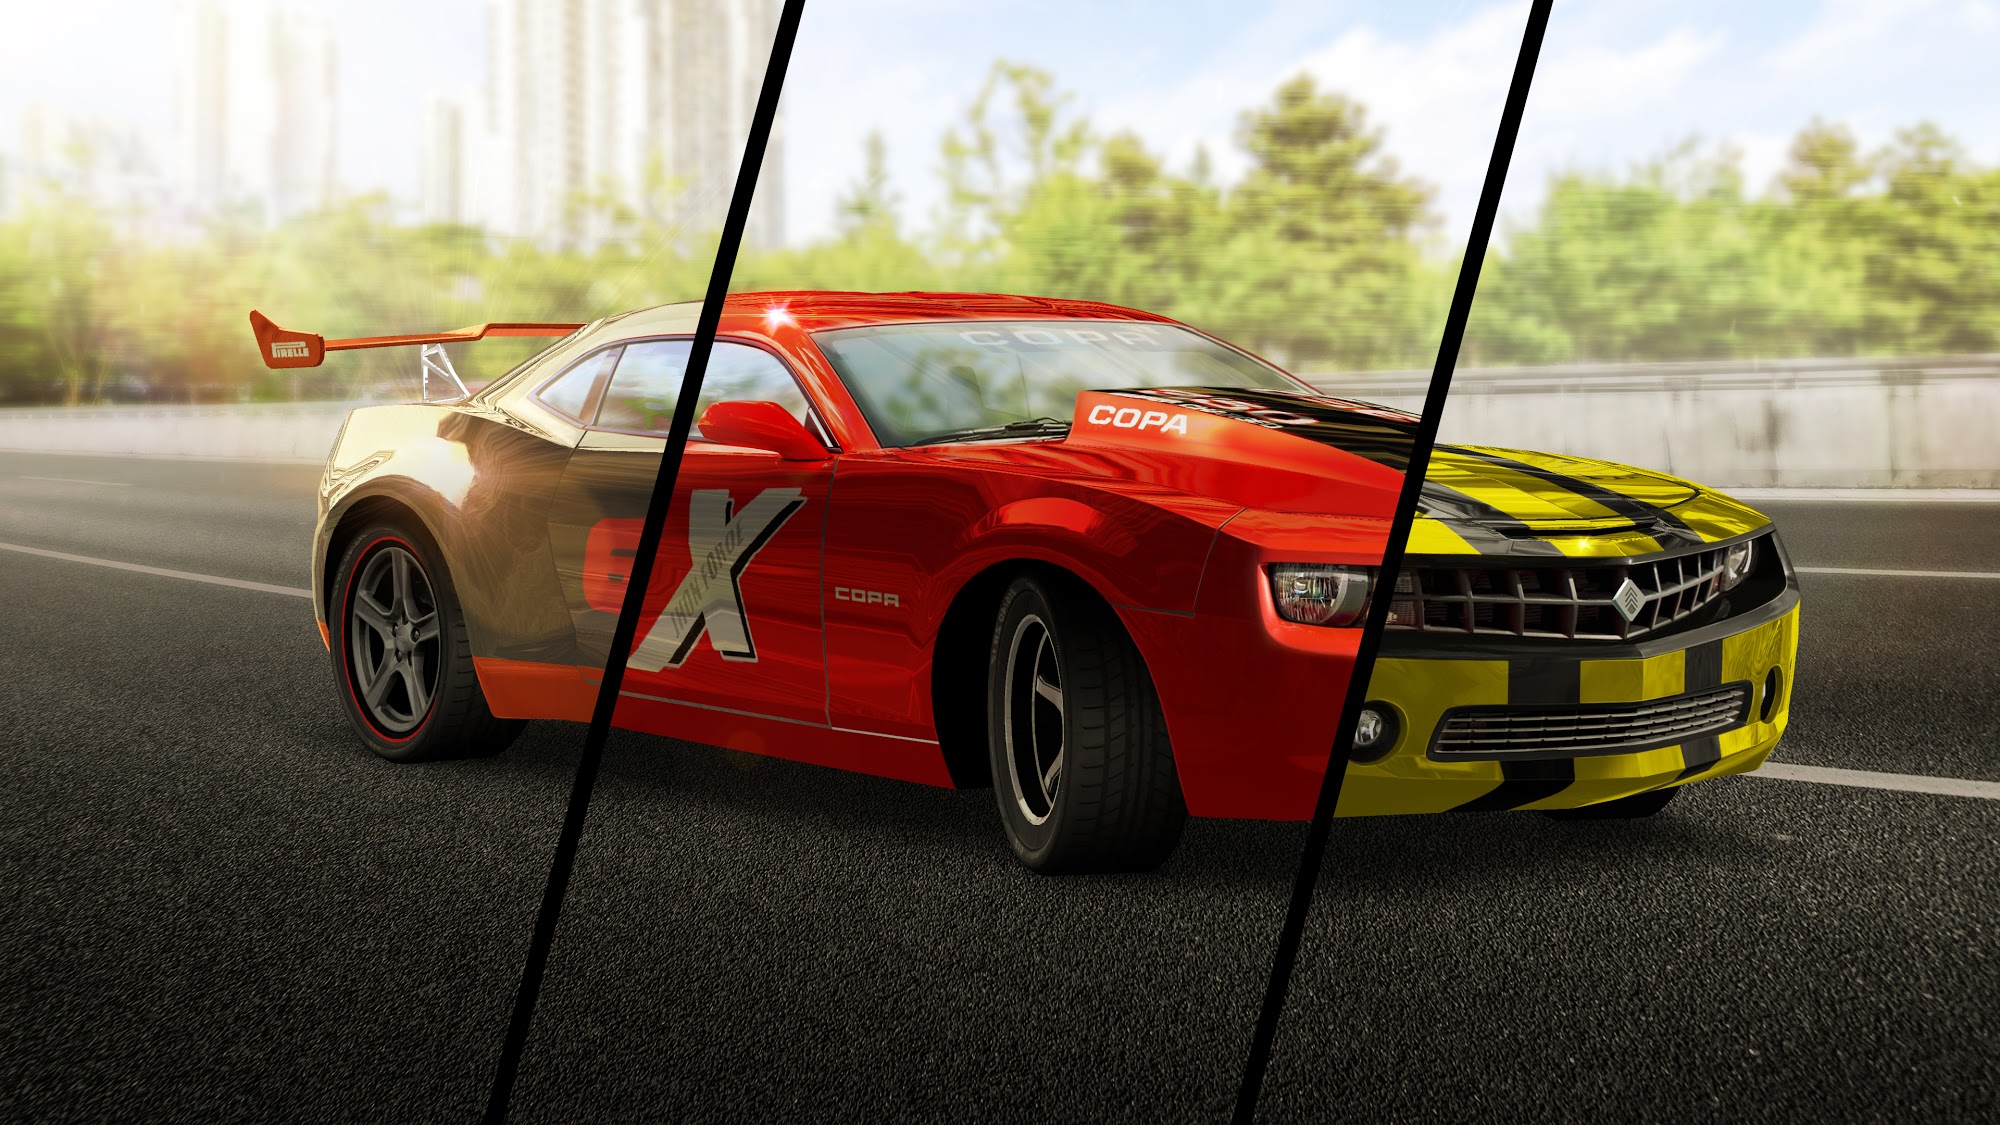 Top Drift - Online Car Racing Simulator for Android